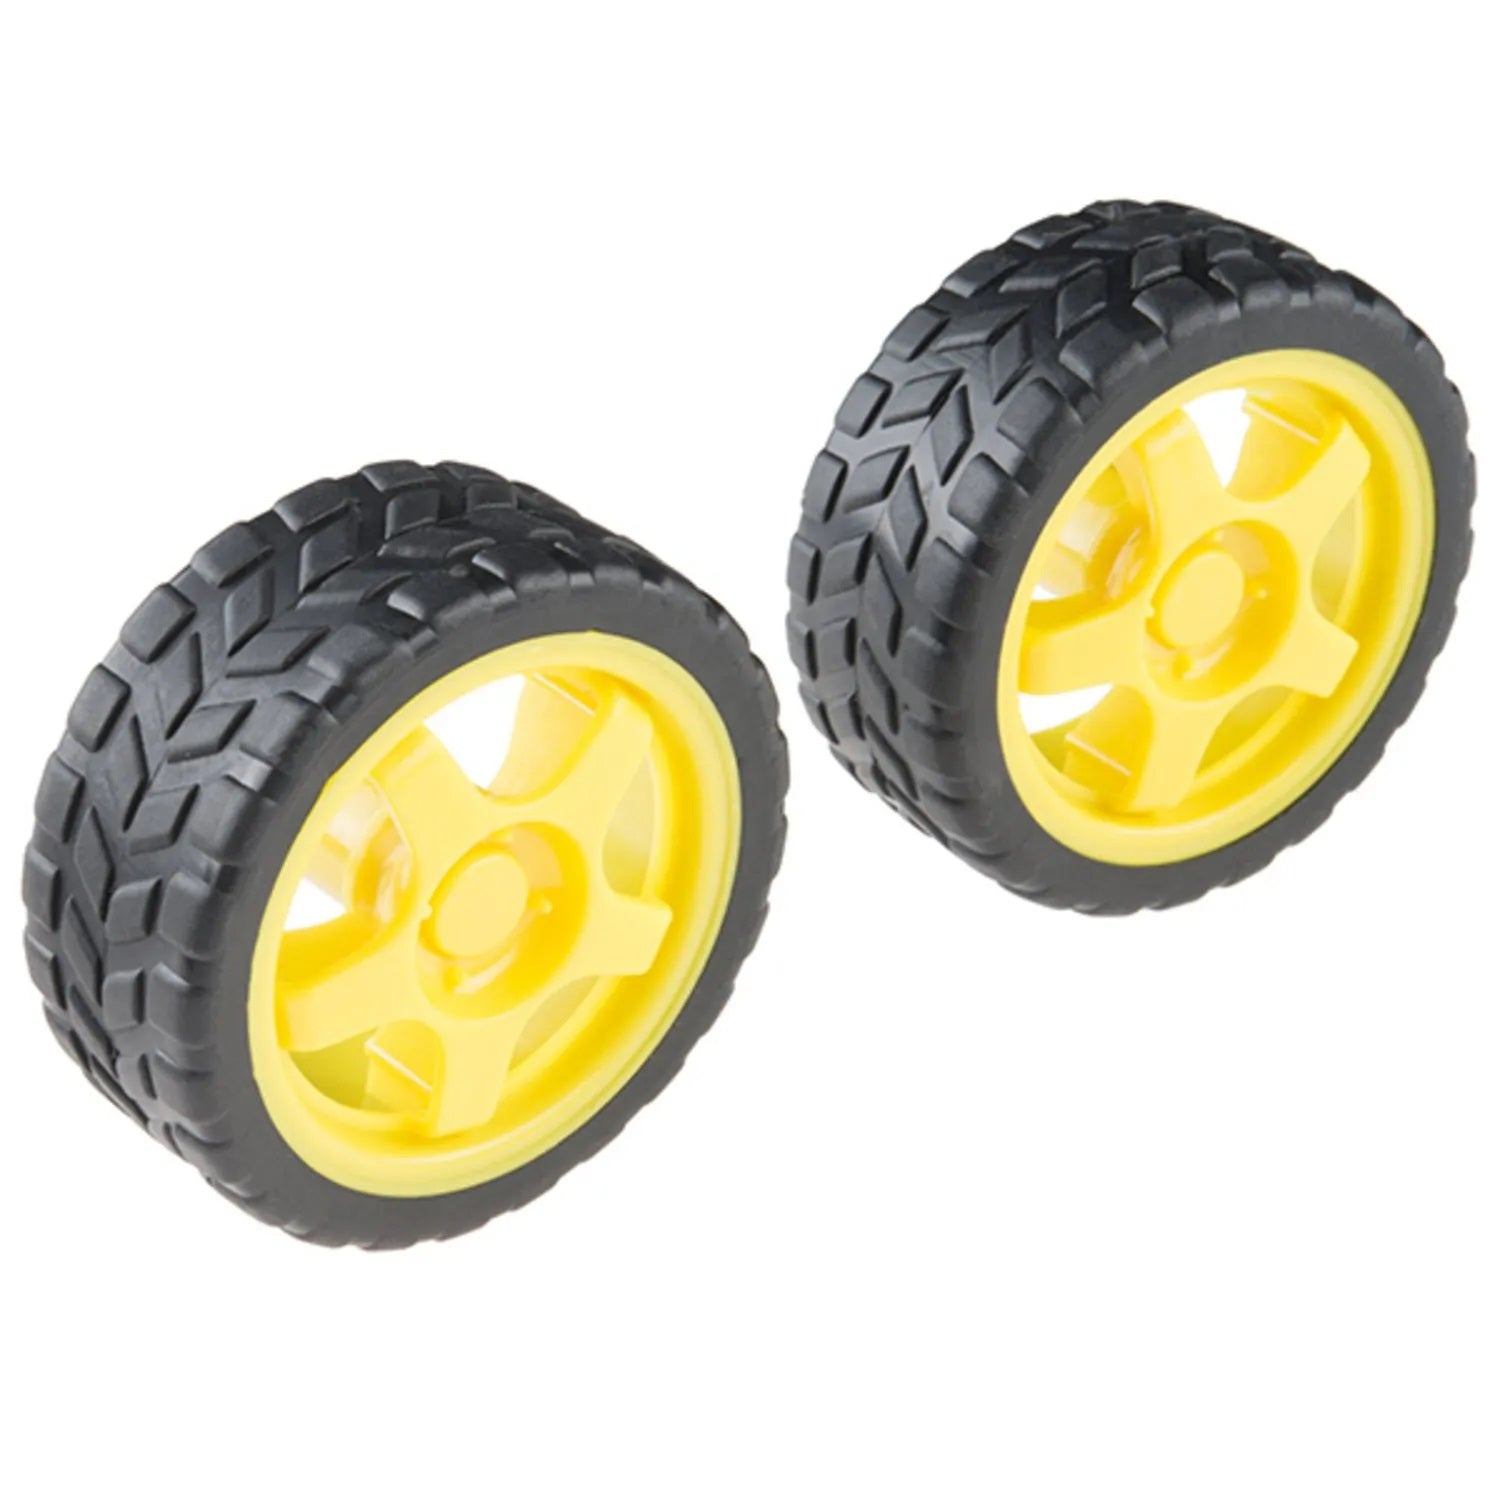 Plastic Wheels - 65mm with Rubber tyres (5mm Shaft) (Pair)